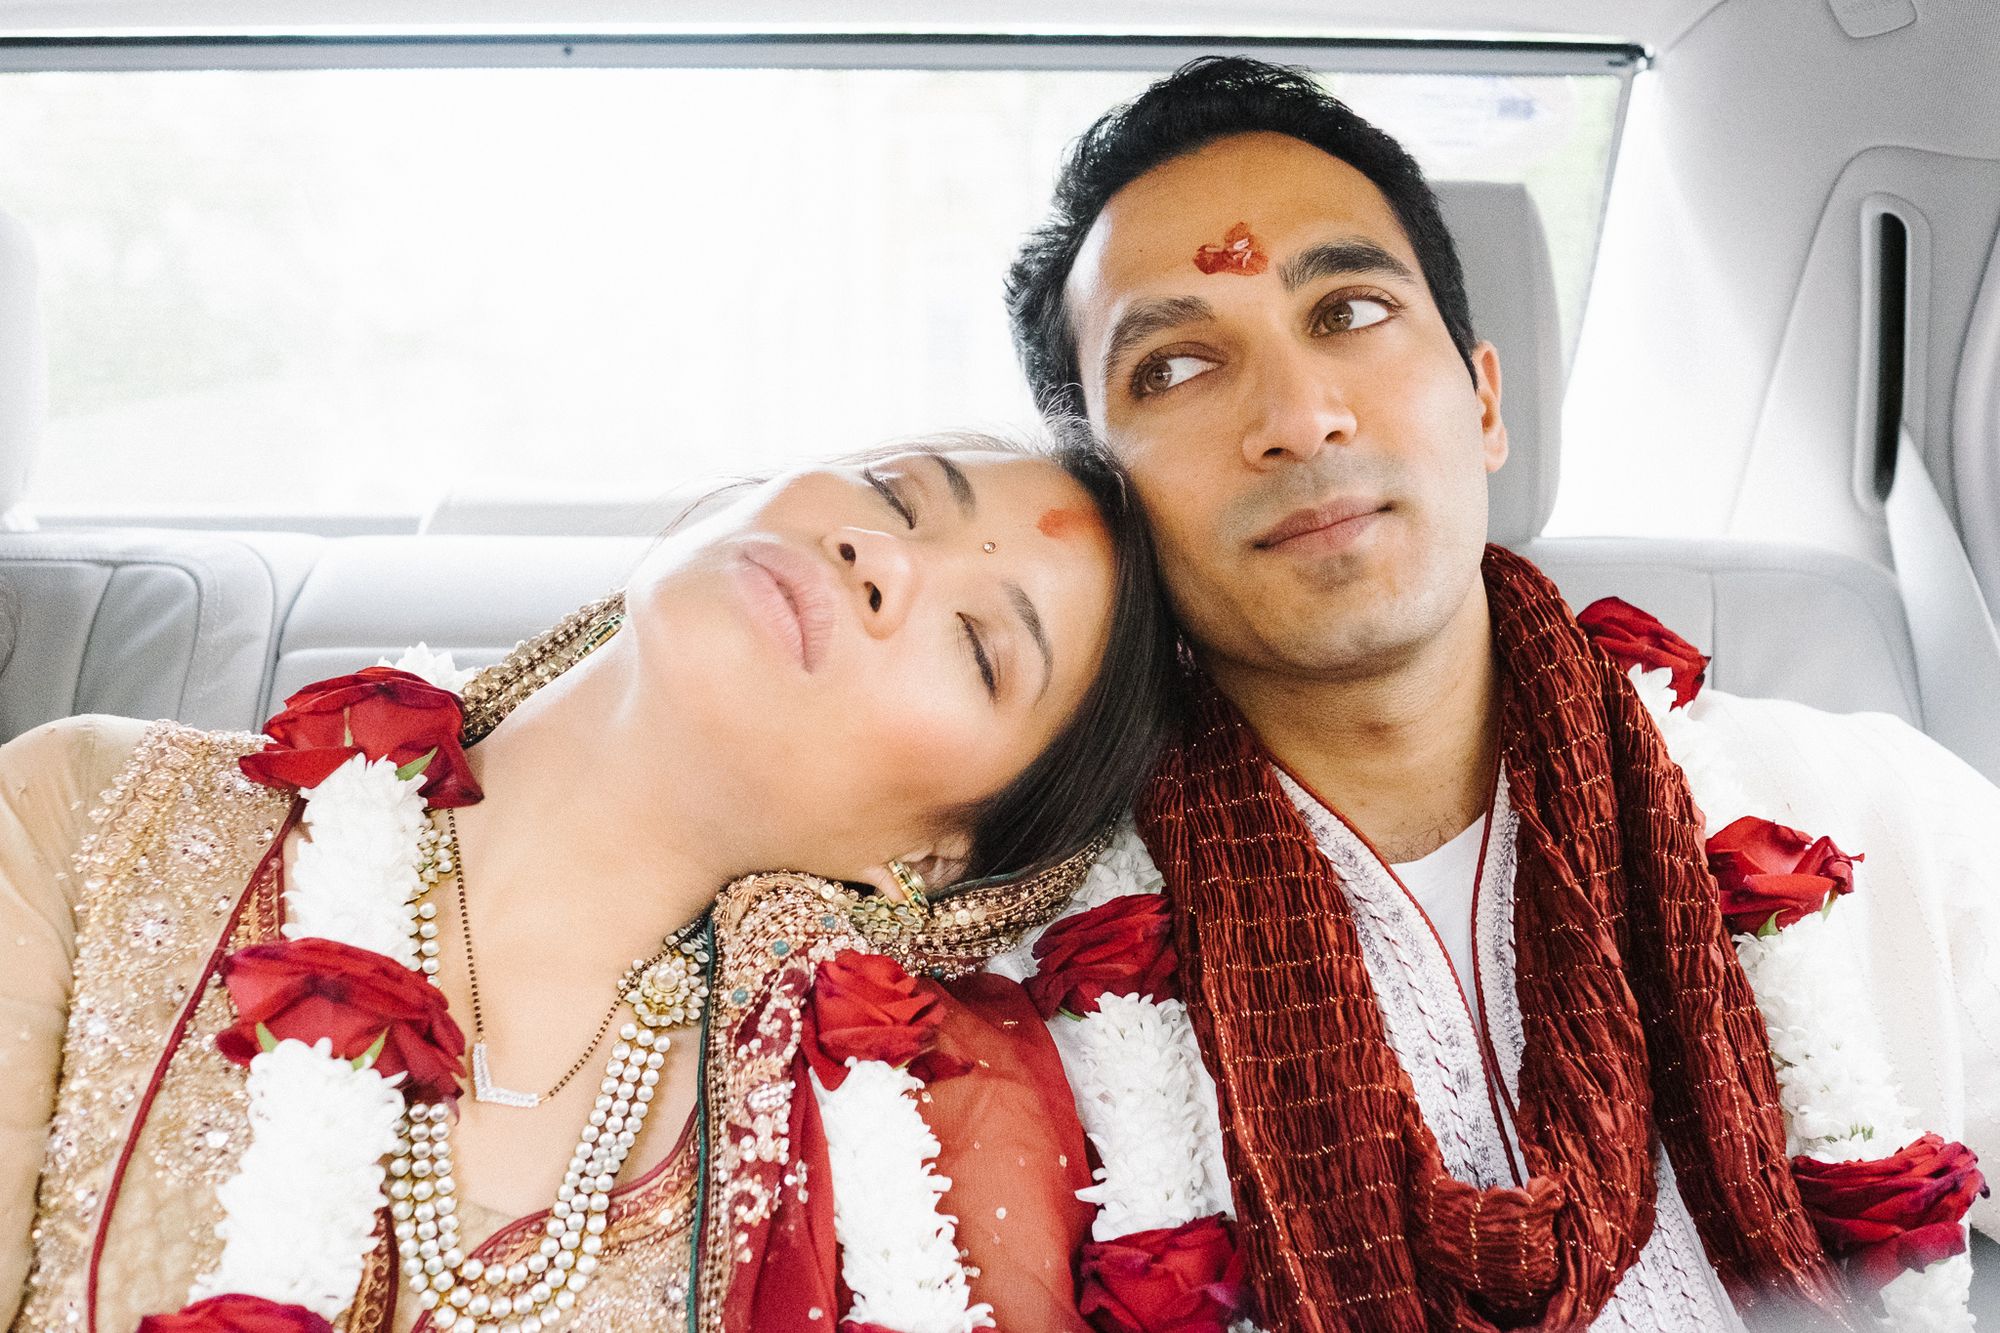 Chinese bride and Indian groom in car after Hindu wedding ceremony